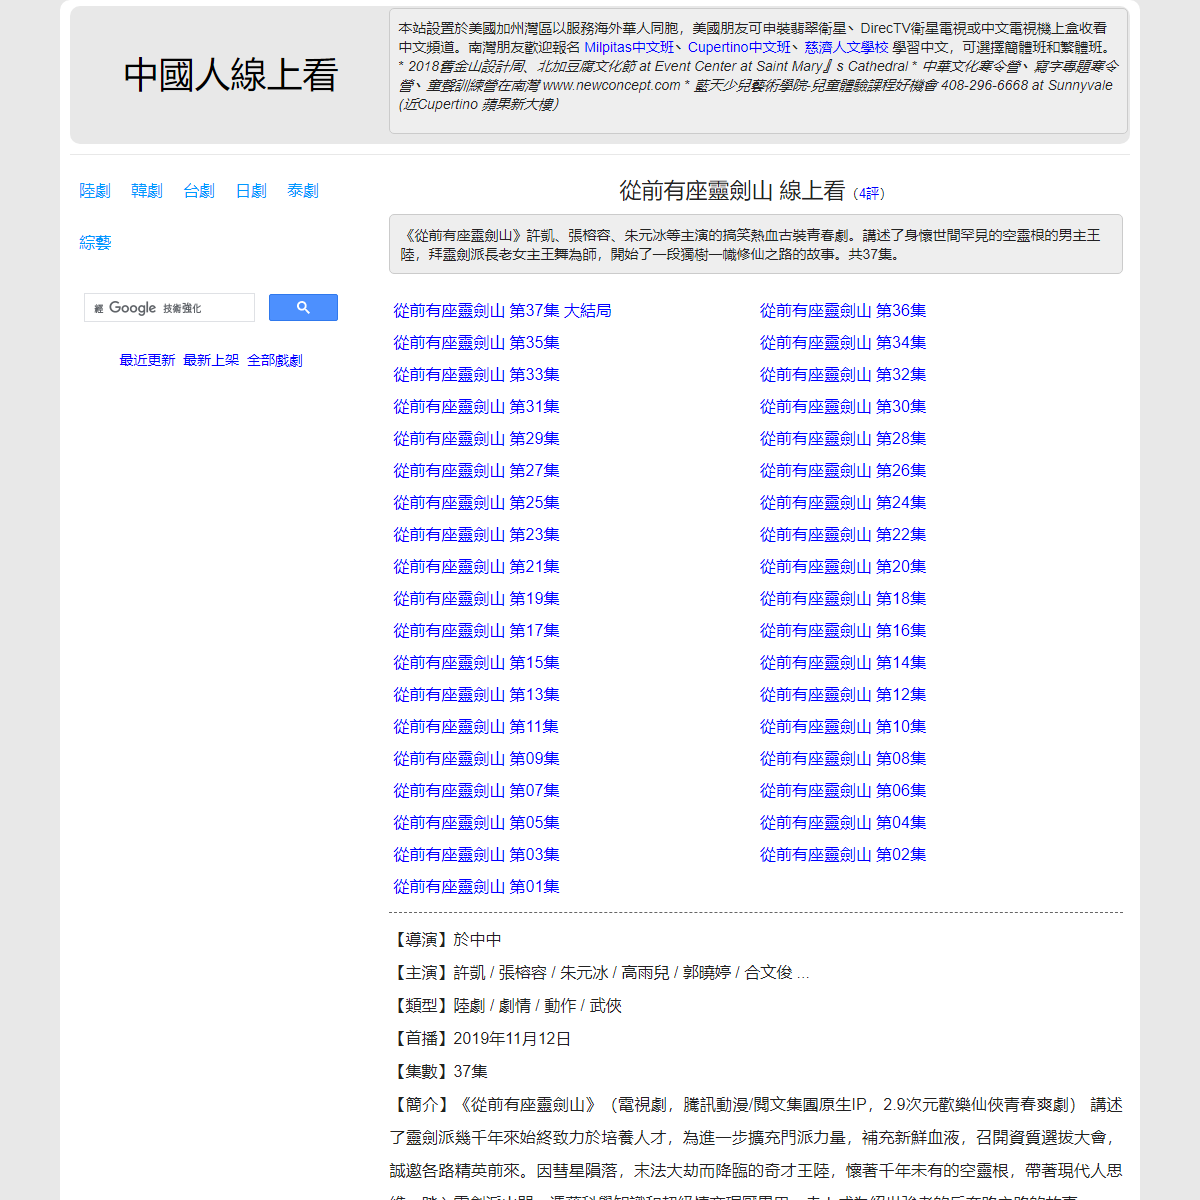 A complete backup of https://chinaq.tv/cn191112b/